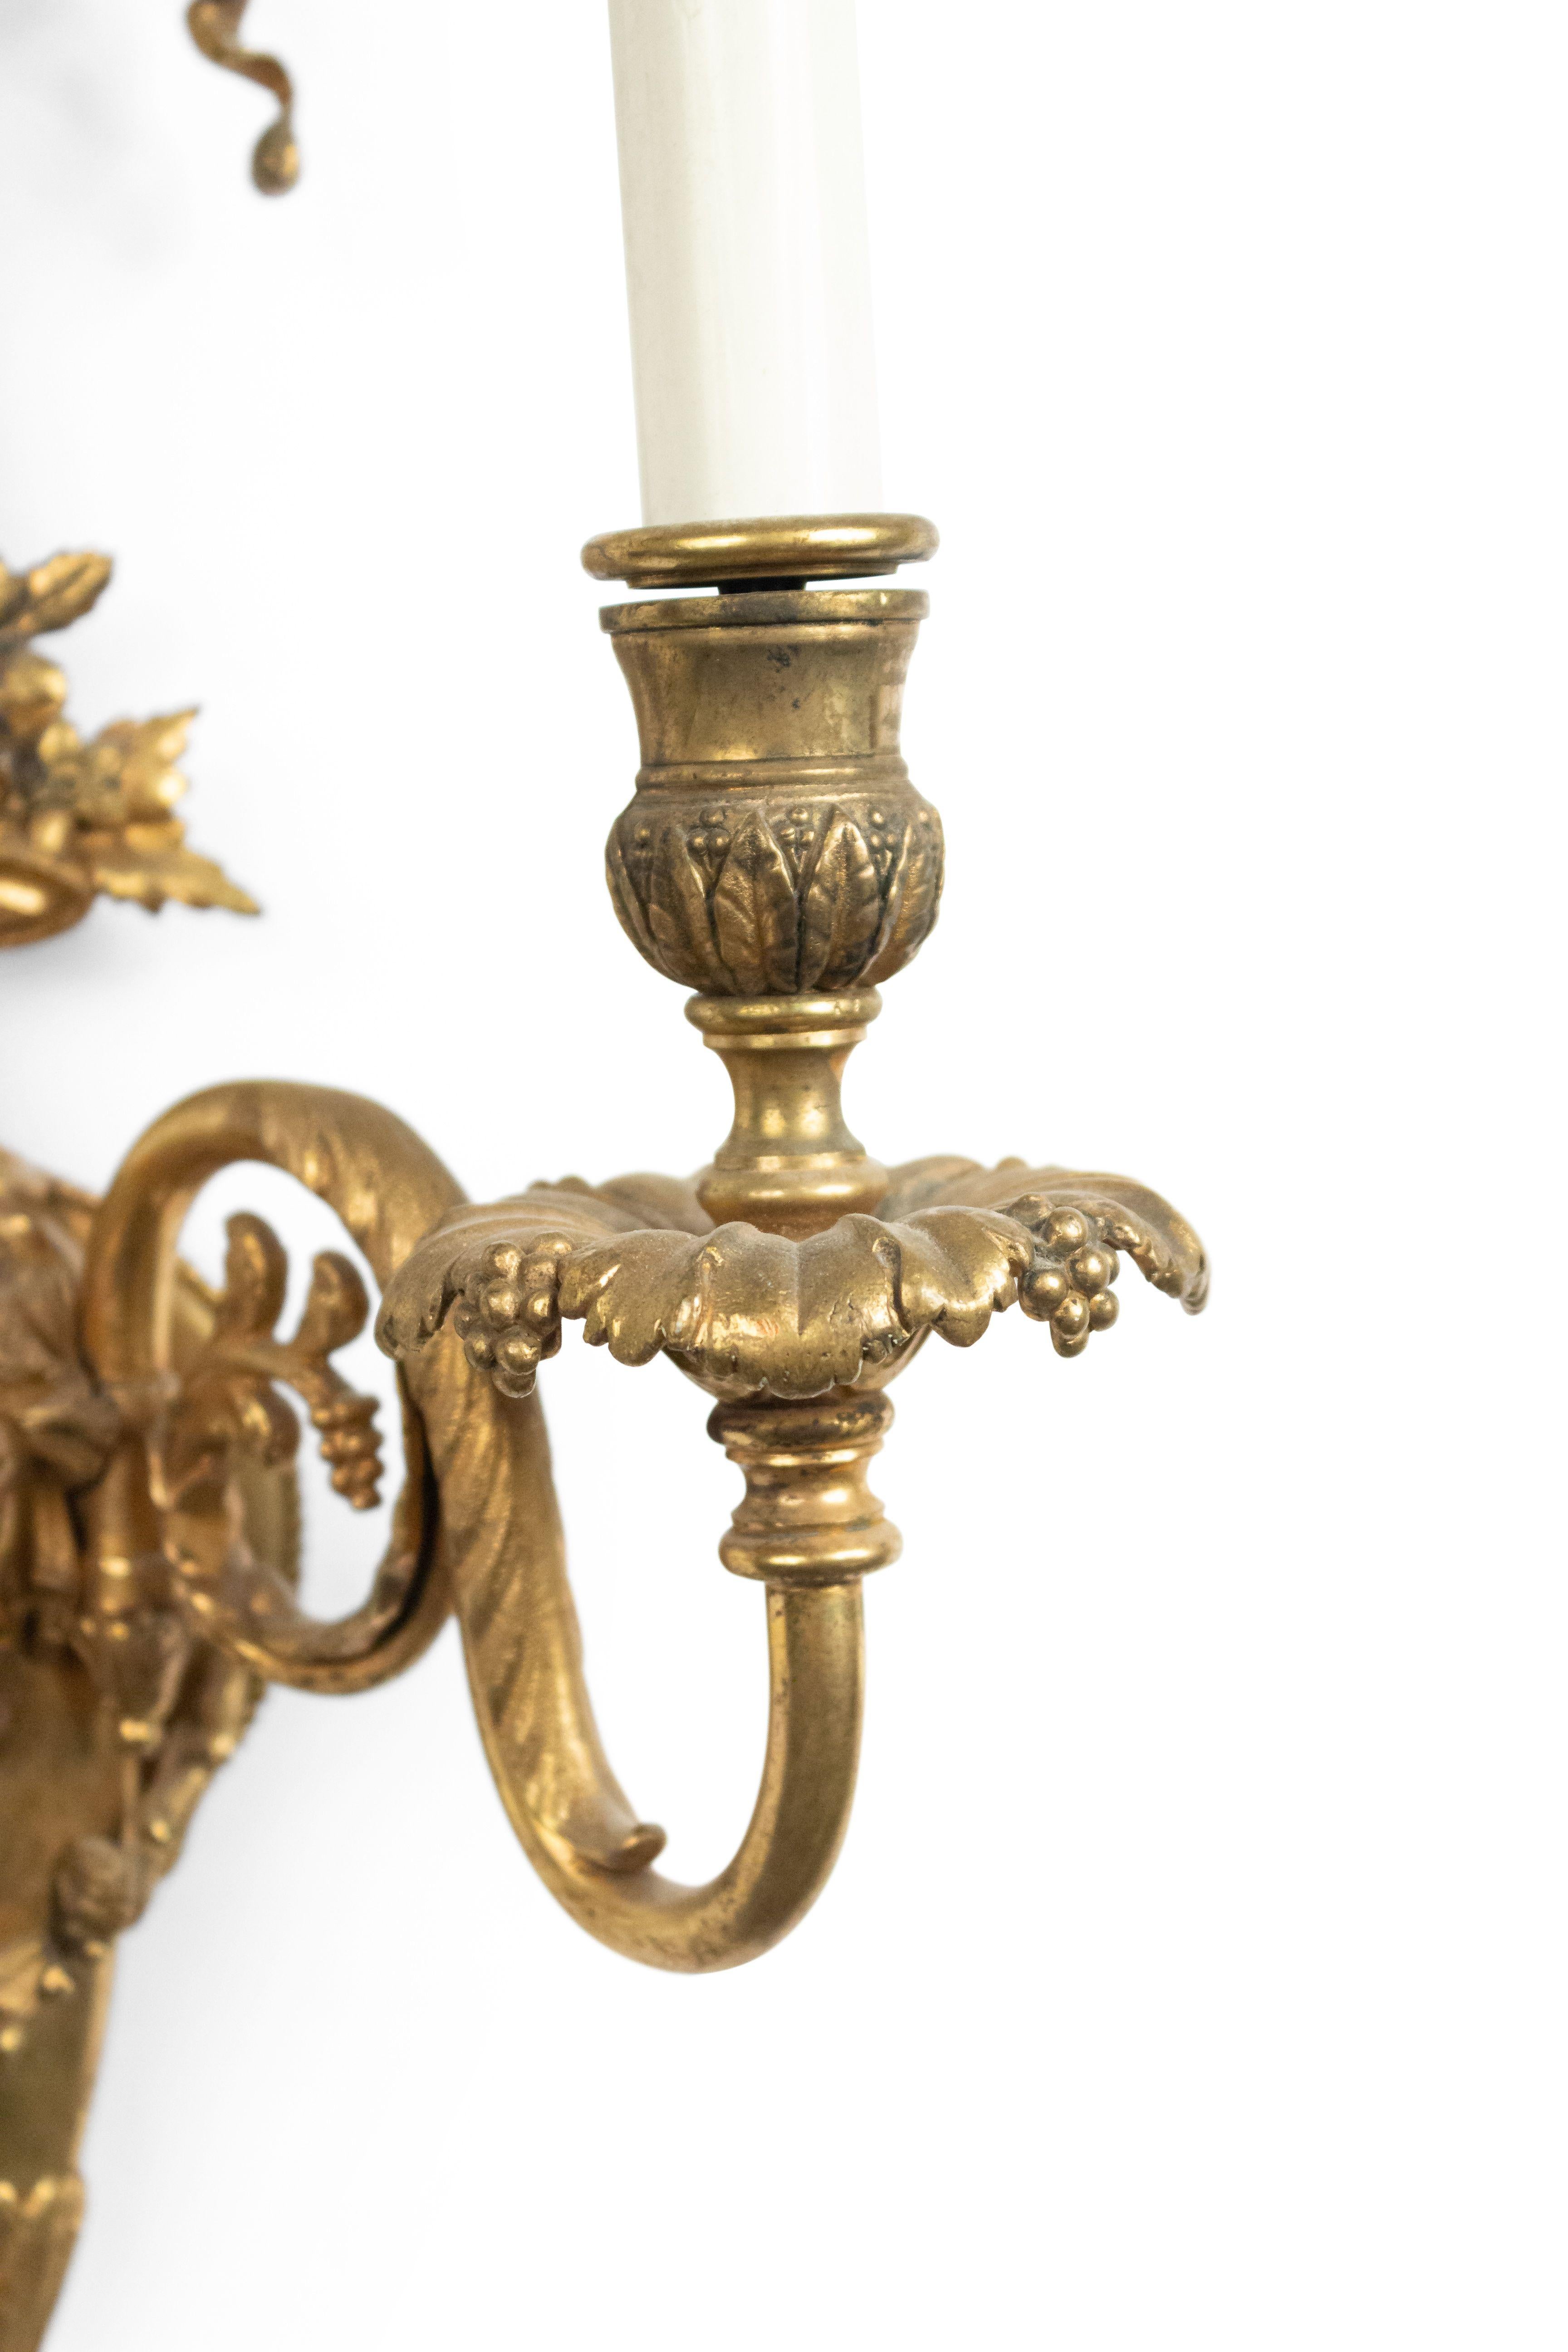 Pair of French Victorian style bronze dore 2 scroll arm wall sconces with lady's head and grape and floral design under bow knot top (19th-20th century).